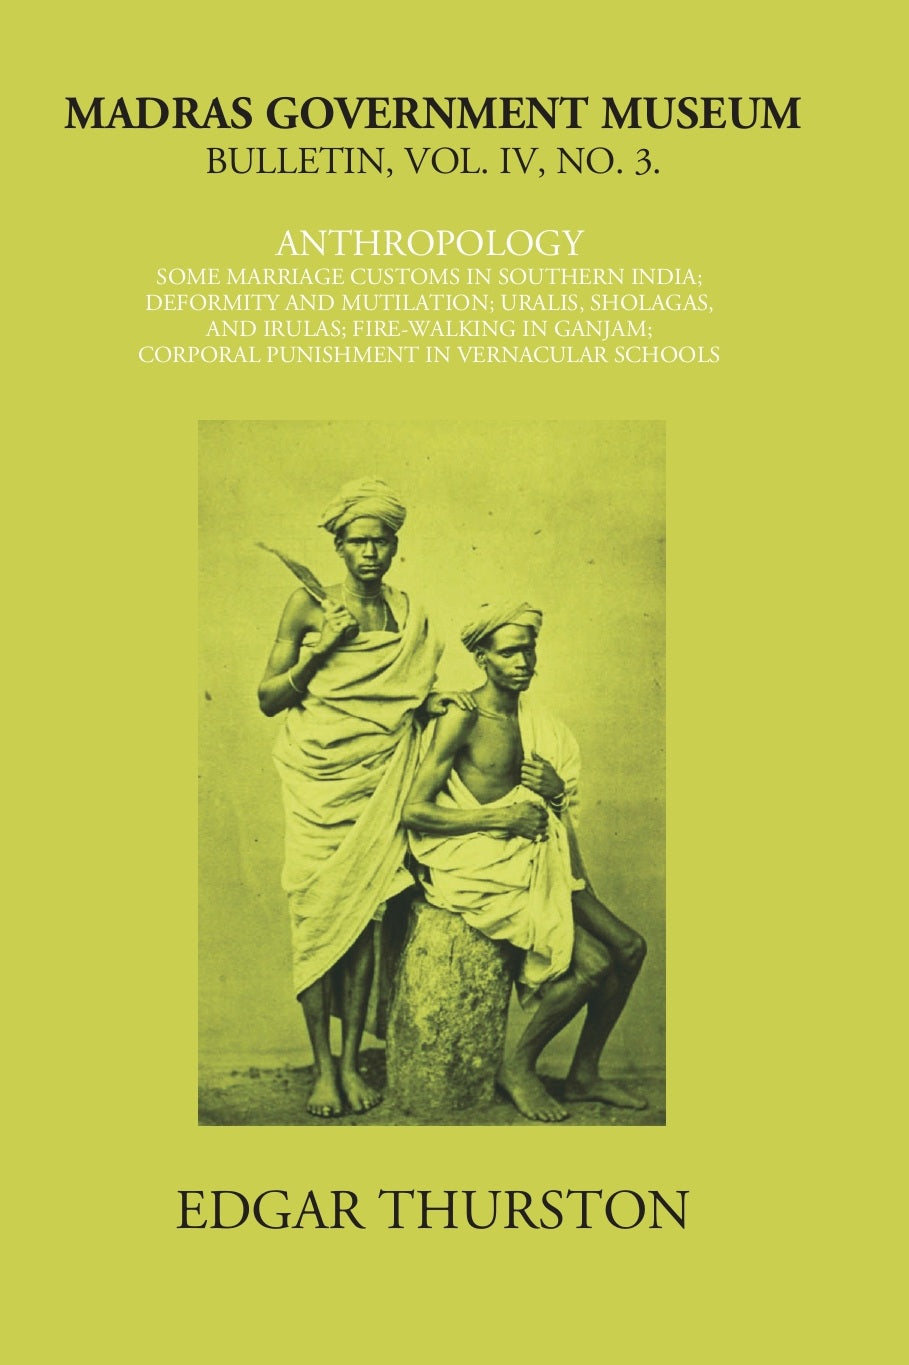 Madras Government Museum Bulletin, Anthropology Some Marriage Customs In Southern India; Deformity And Mutilation; Uralis, Sholagas, And Irulas; Fire-Walking In Ganjam; Corporal Punishment in Vernacular Schools Volume Vol. 4th, No. 3